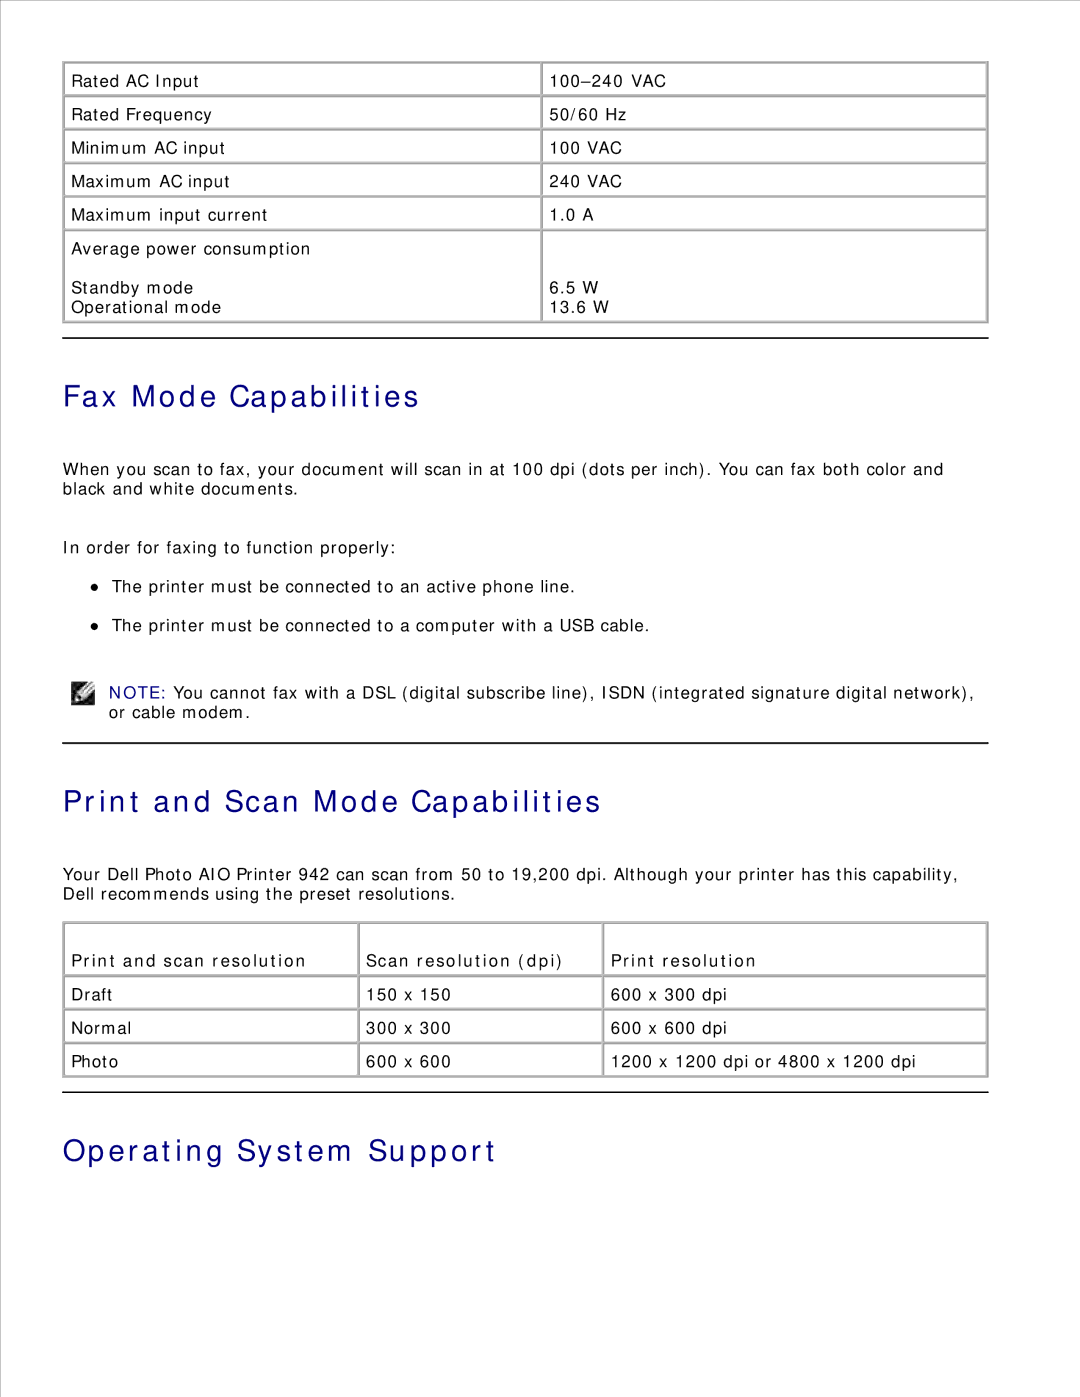 Dell 942 manual Fax Mode Capabilities, Print and Scan Mode Capabilities, Operating System Support 